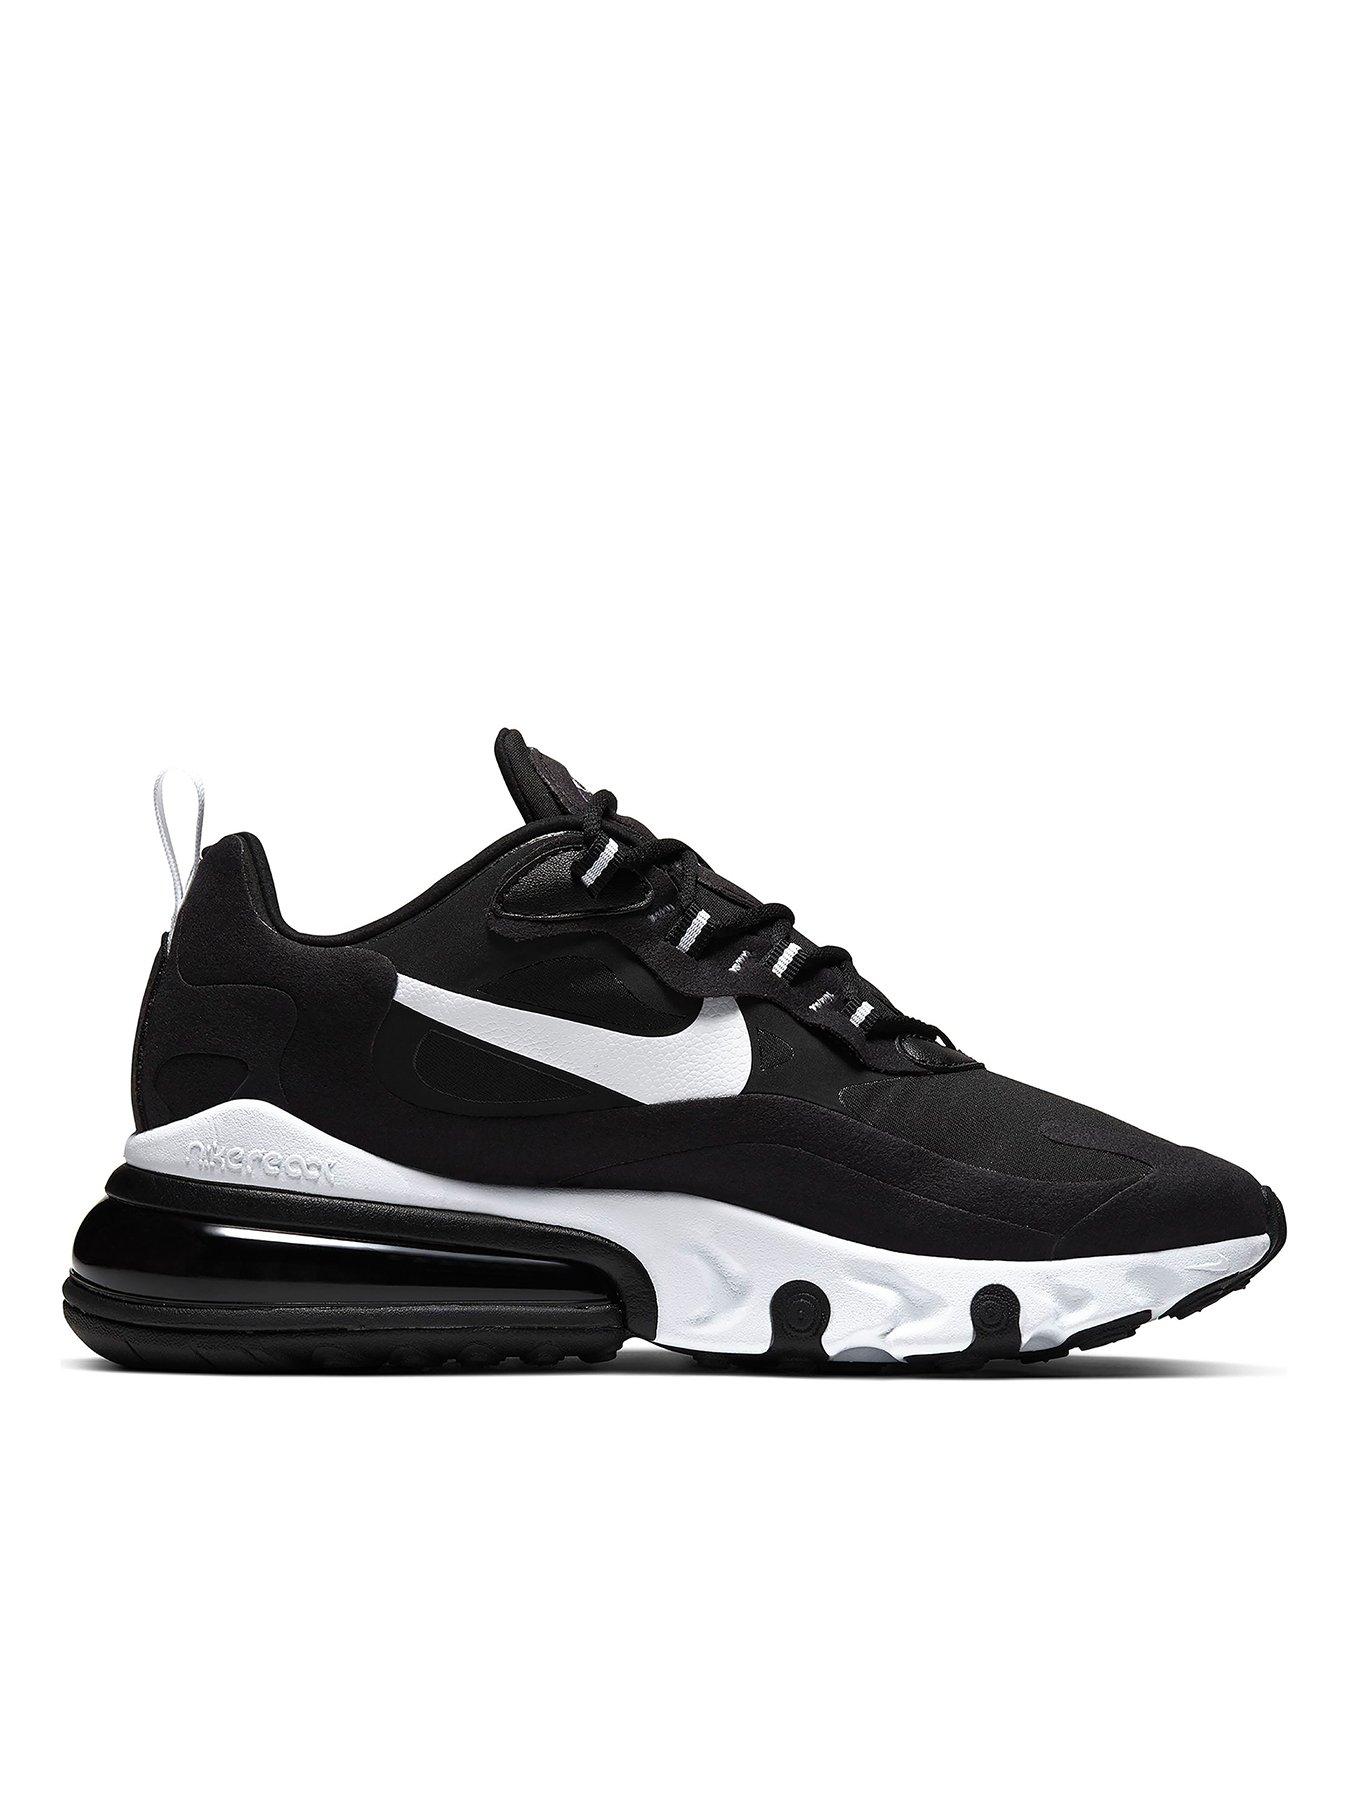 nike air max 270 black and white size 3